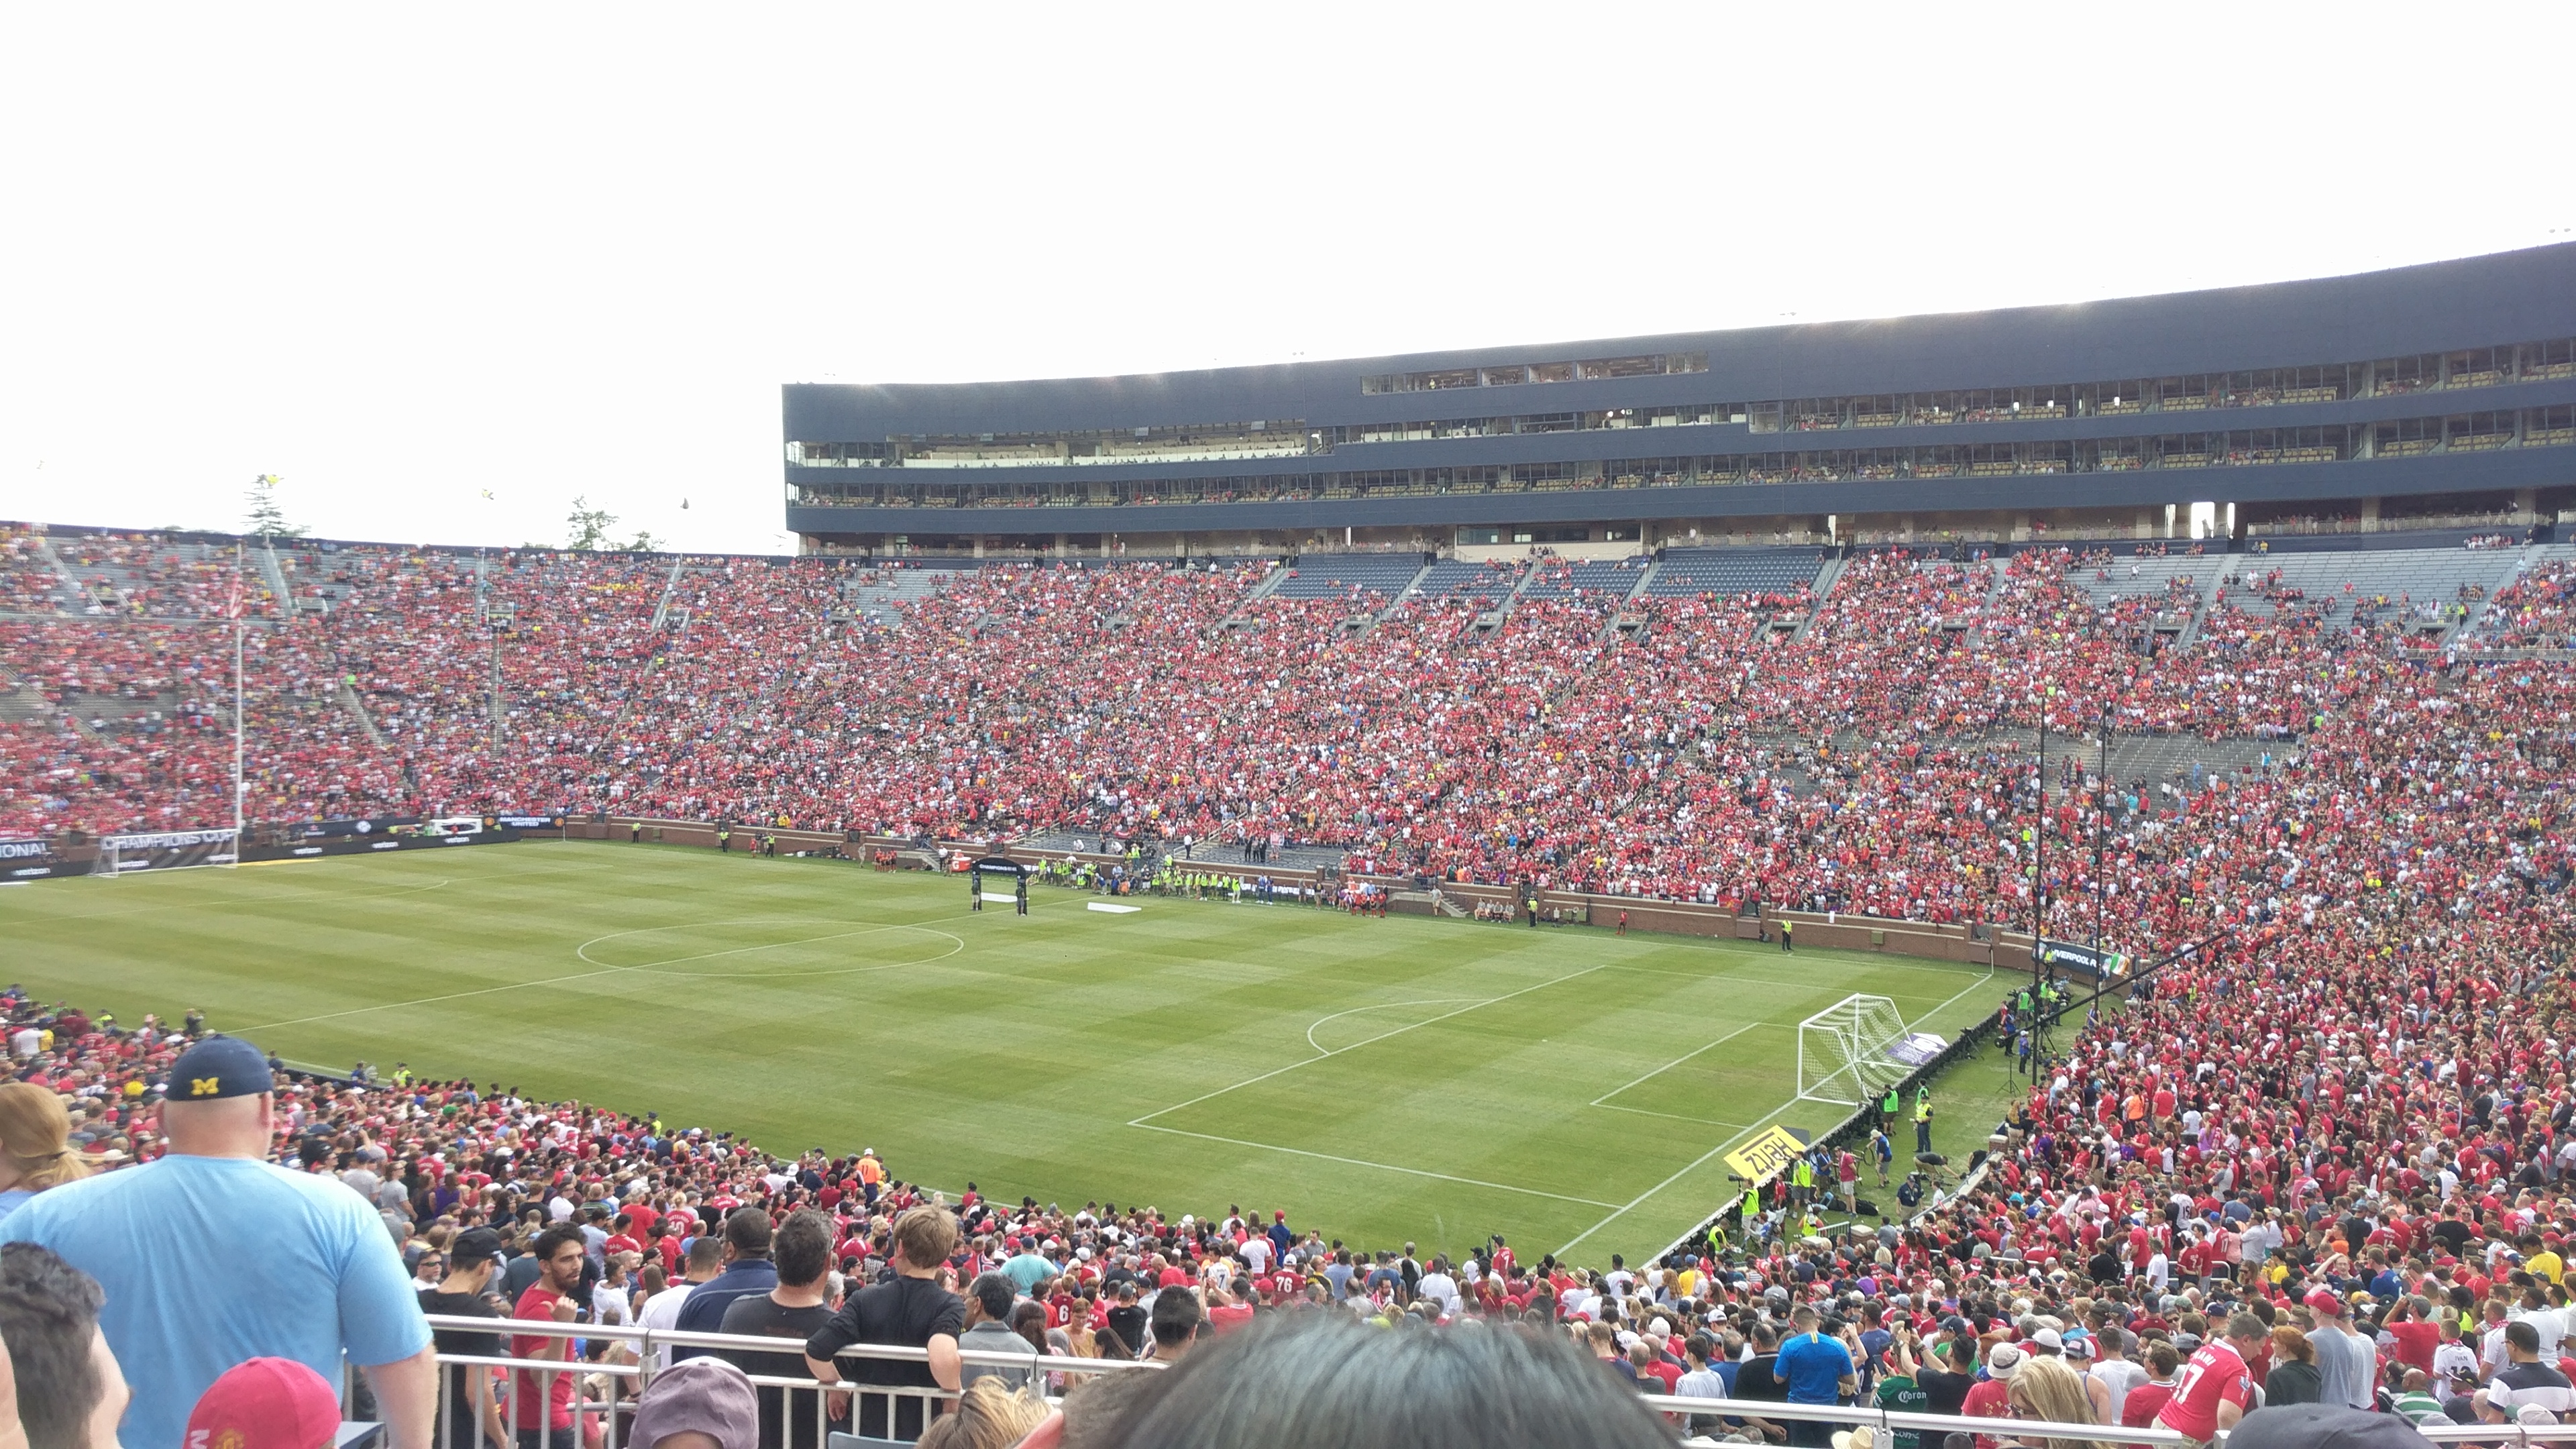 Liverpool play Manchester United in Ann Arbor, July 2018